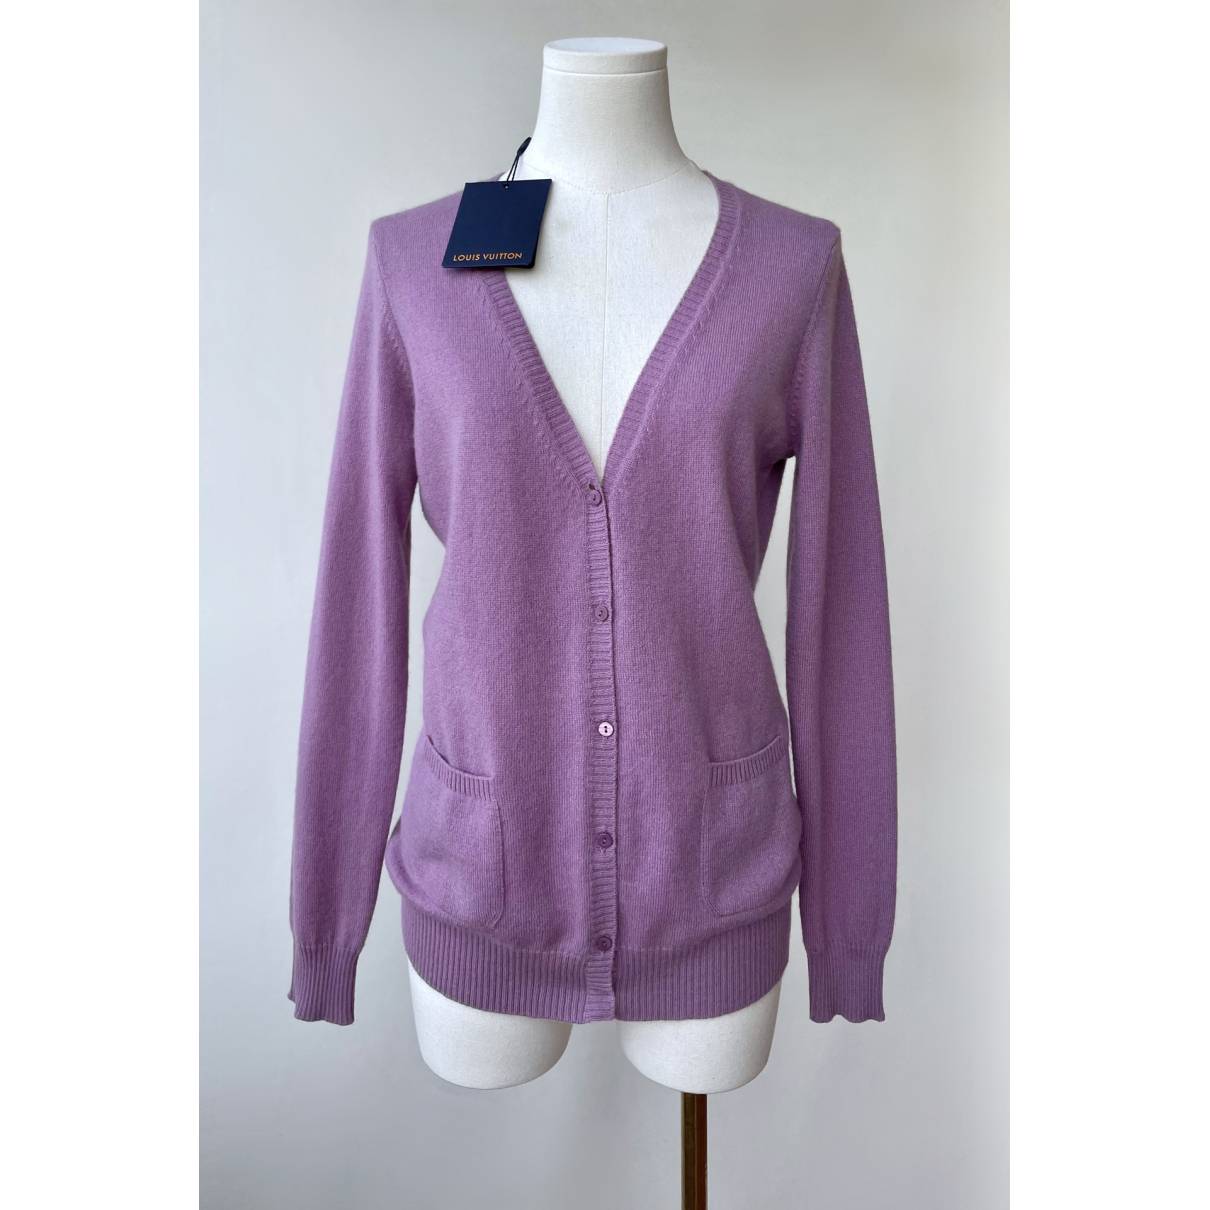 Louis Vuitton - Authenticated Knitwear - Cashmere Purple Plain for Women, Never Worn, with Tag